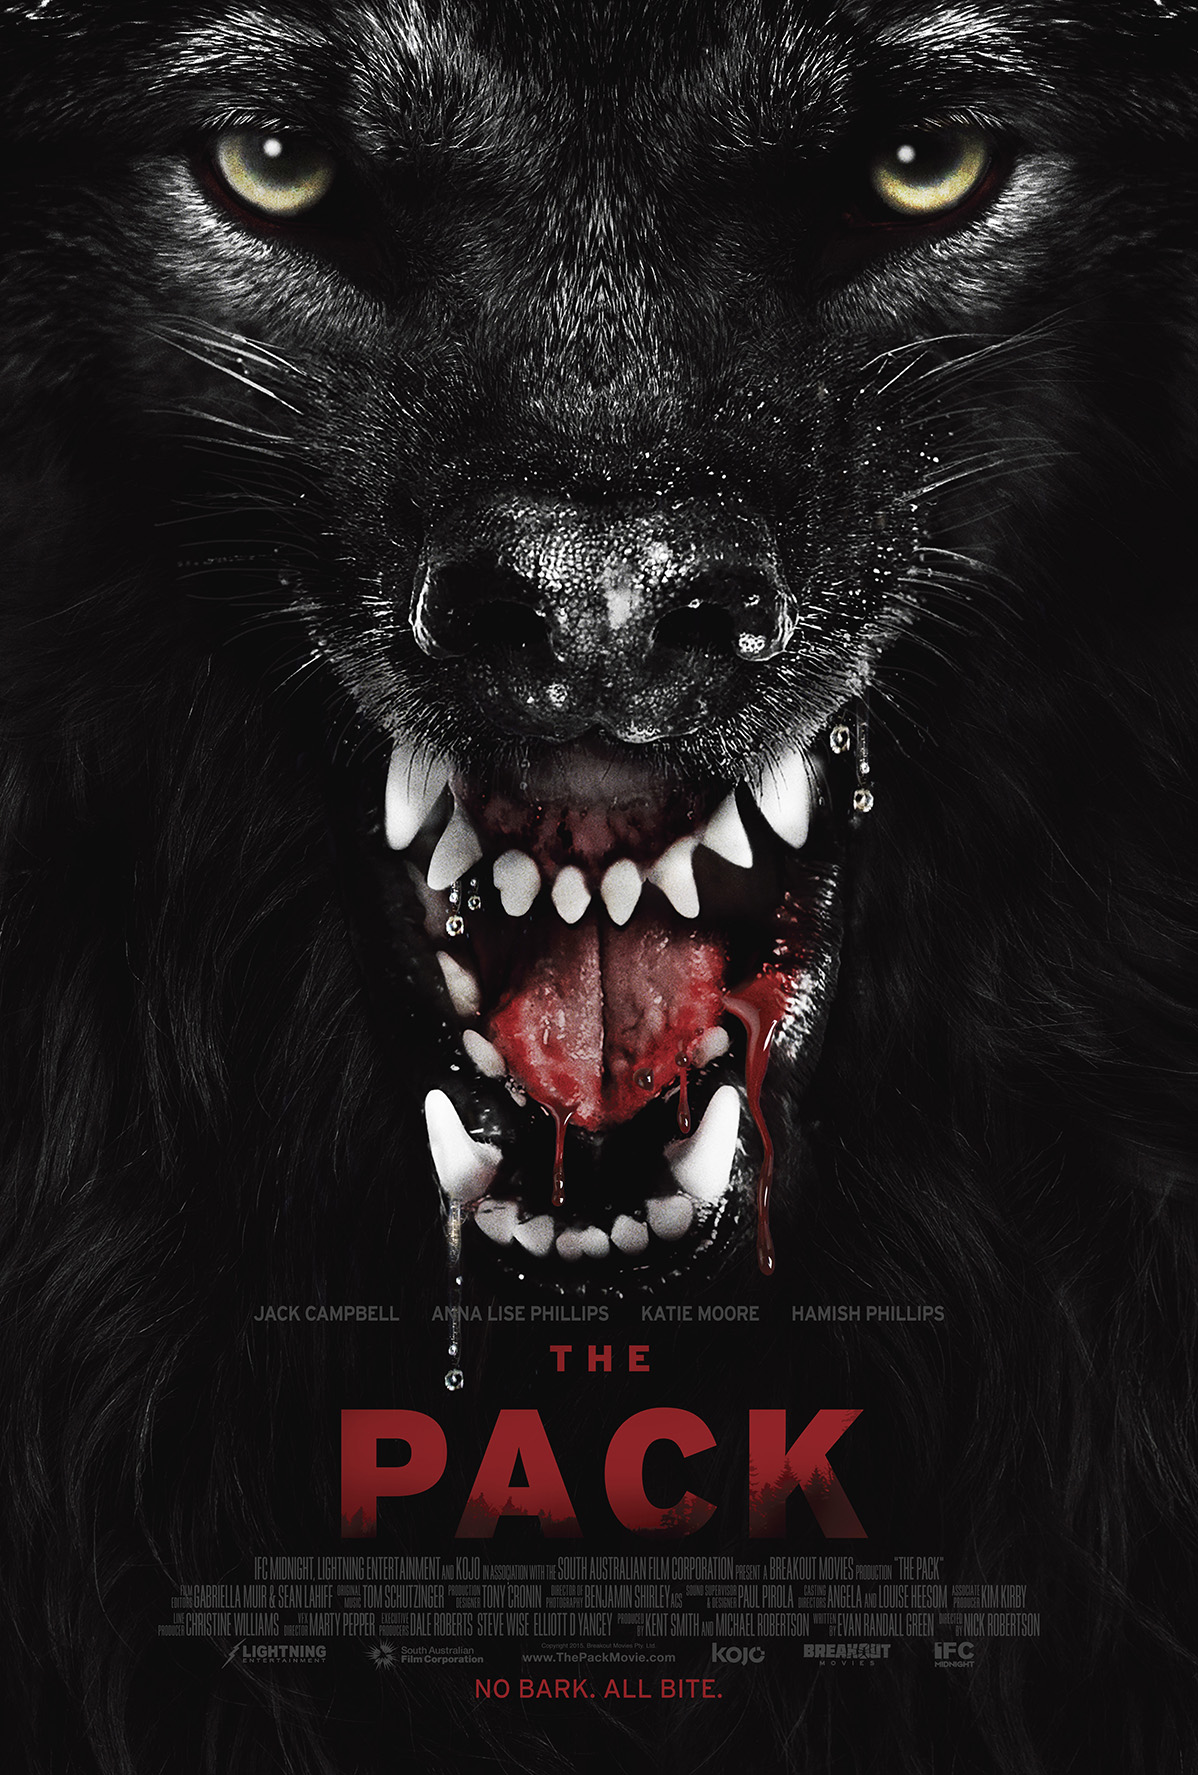 THE PACK poster via IFC